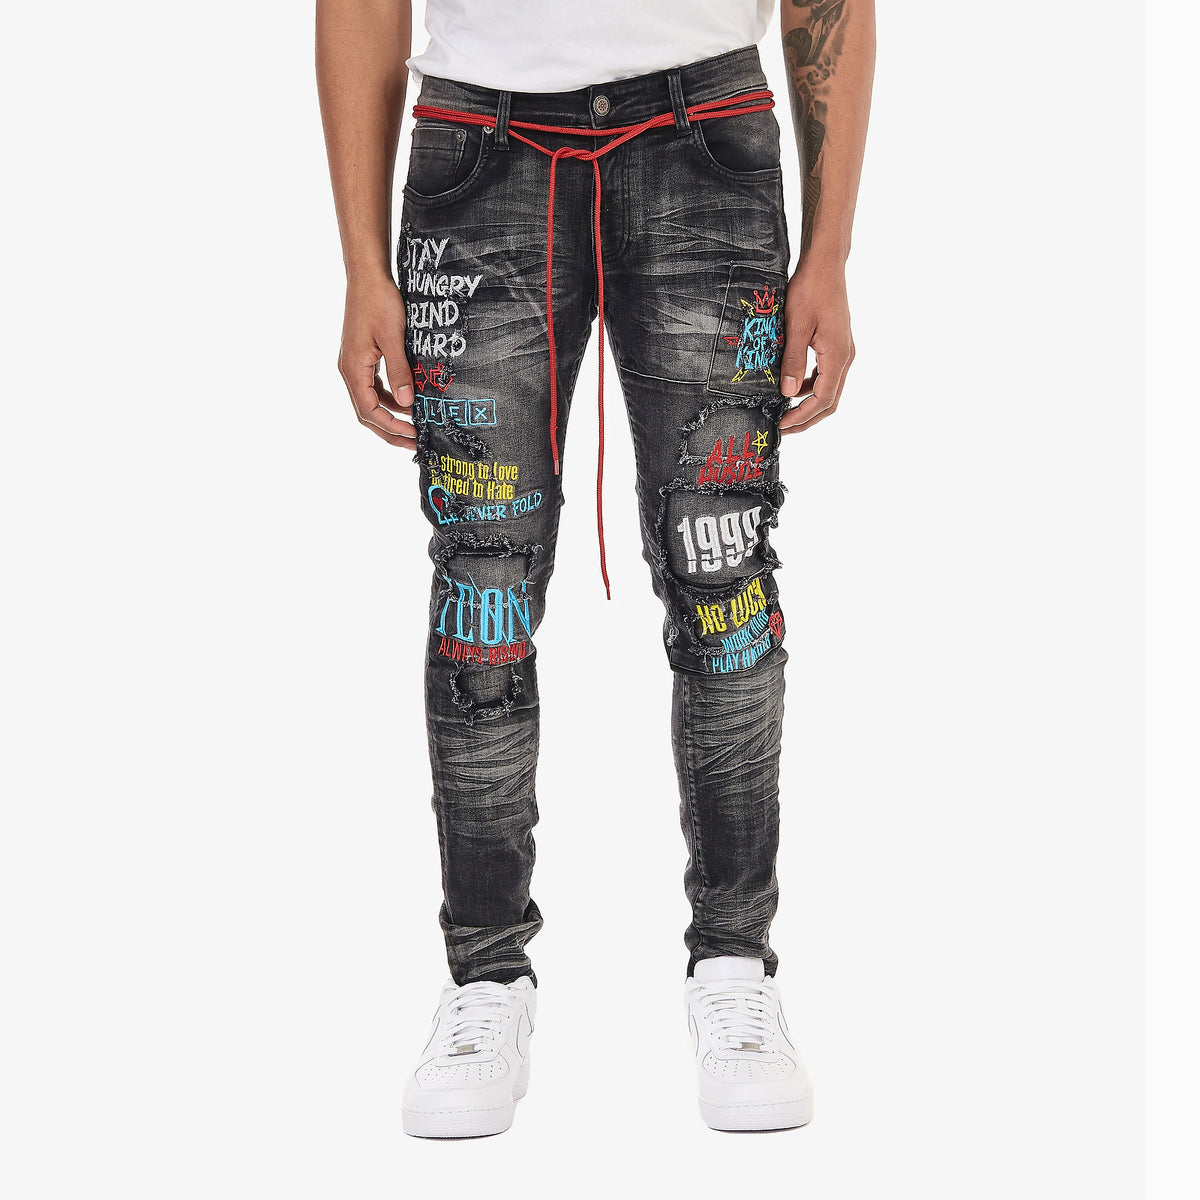 BLACK JEANS W/ COLOR EMBROIDERY